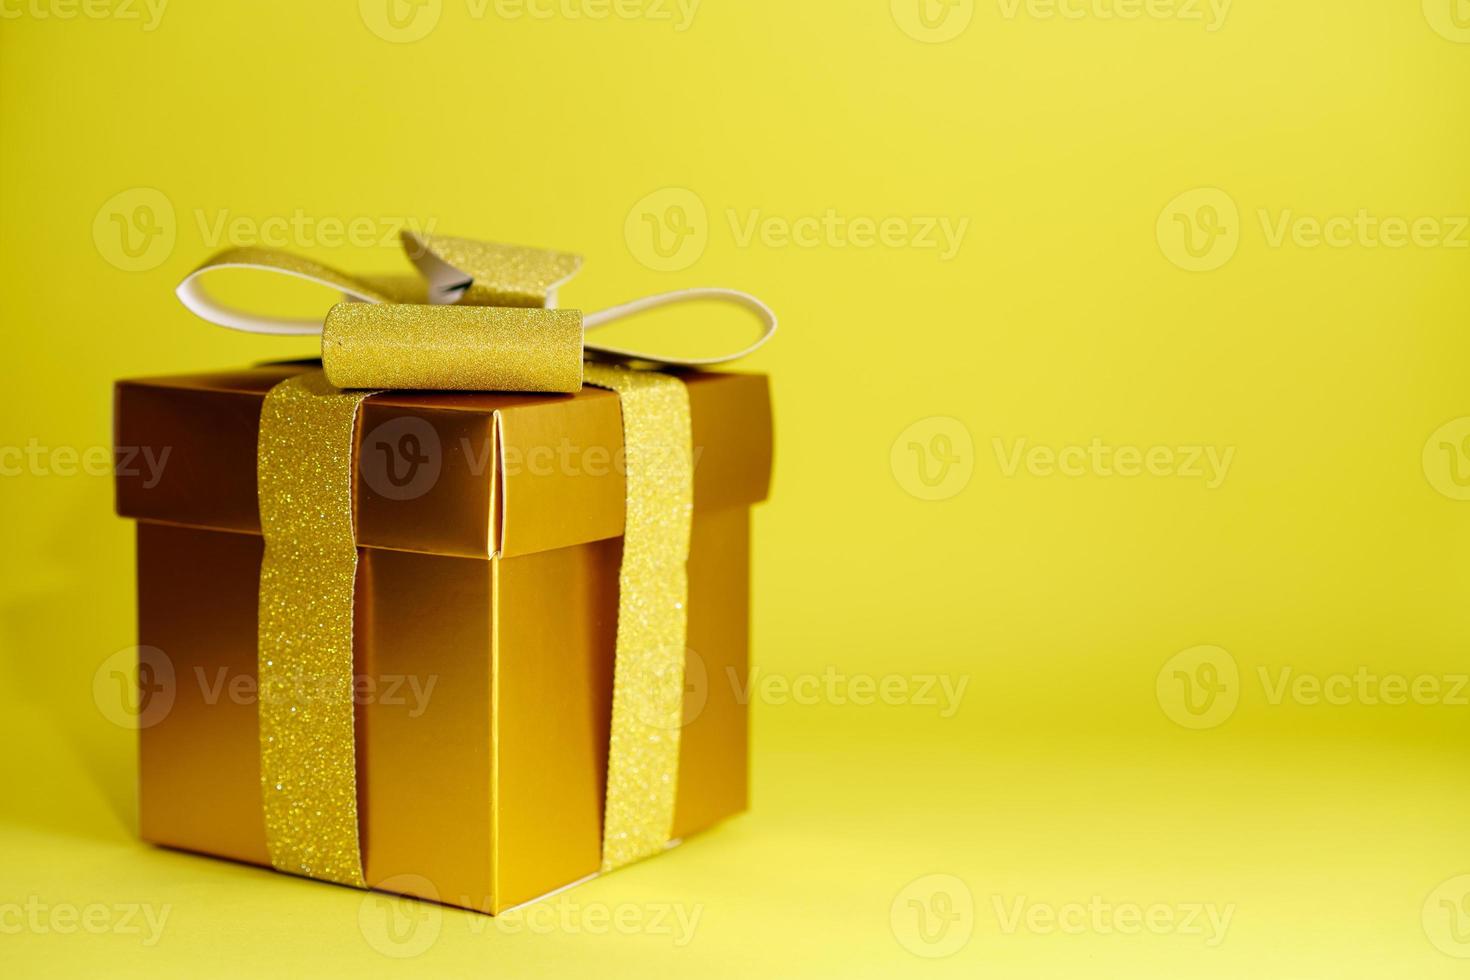 Golden box with gold paper ribbon and bow on yellow background is a universal photo